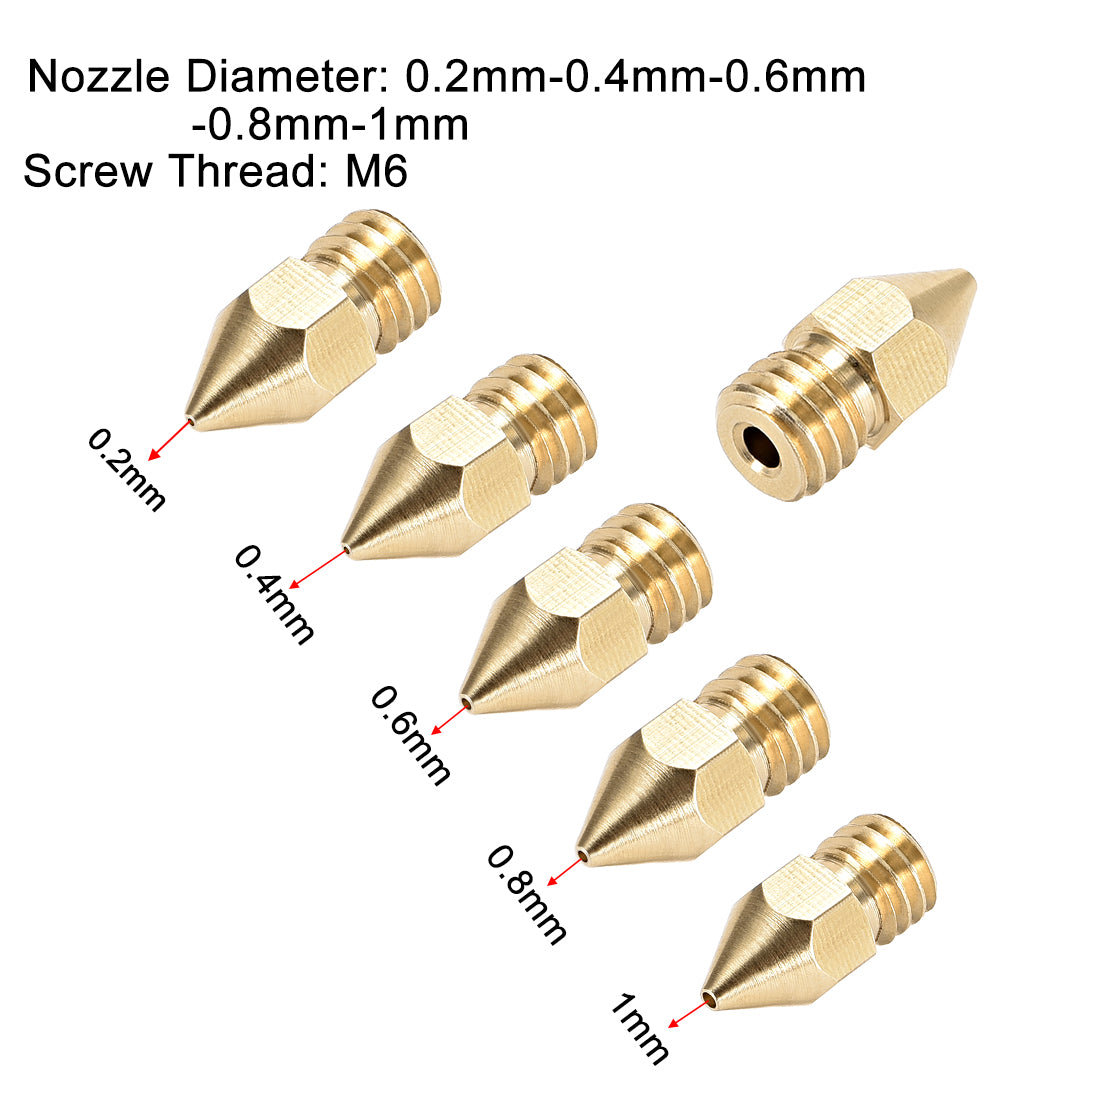 uxcell Uxcell 3D Printer Nozzle Fit for MK8,for 1.75mm Filament Brass,0.2mm - 1mm Total 10pcs